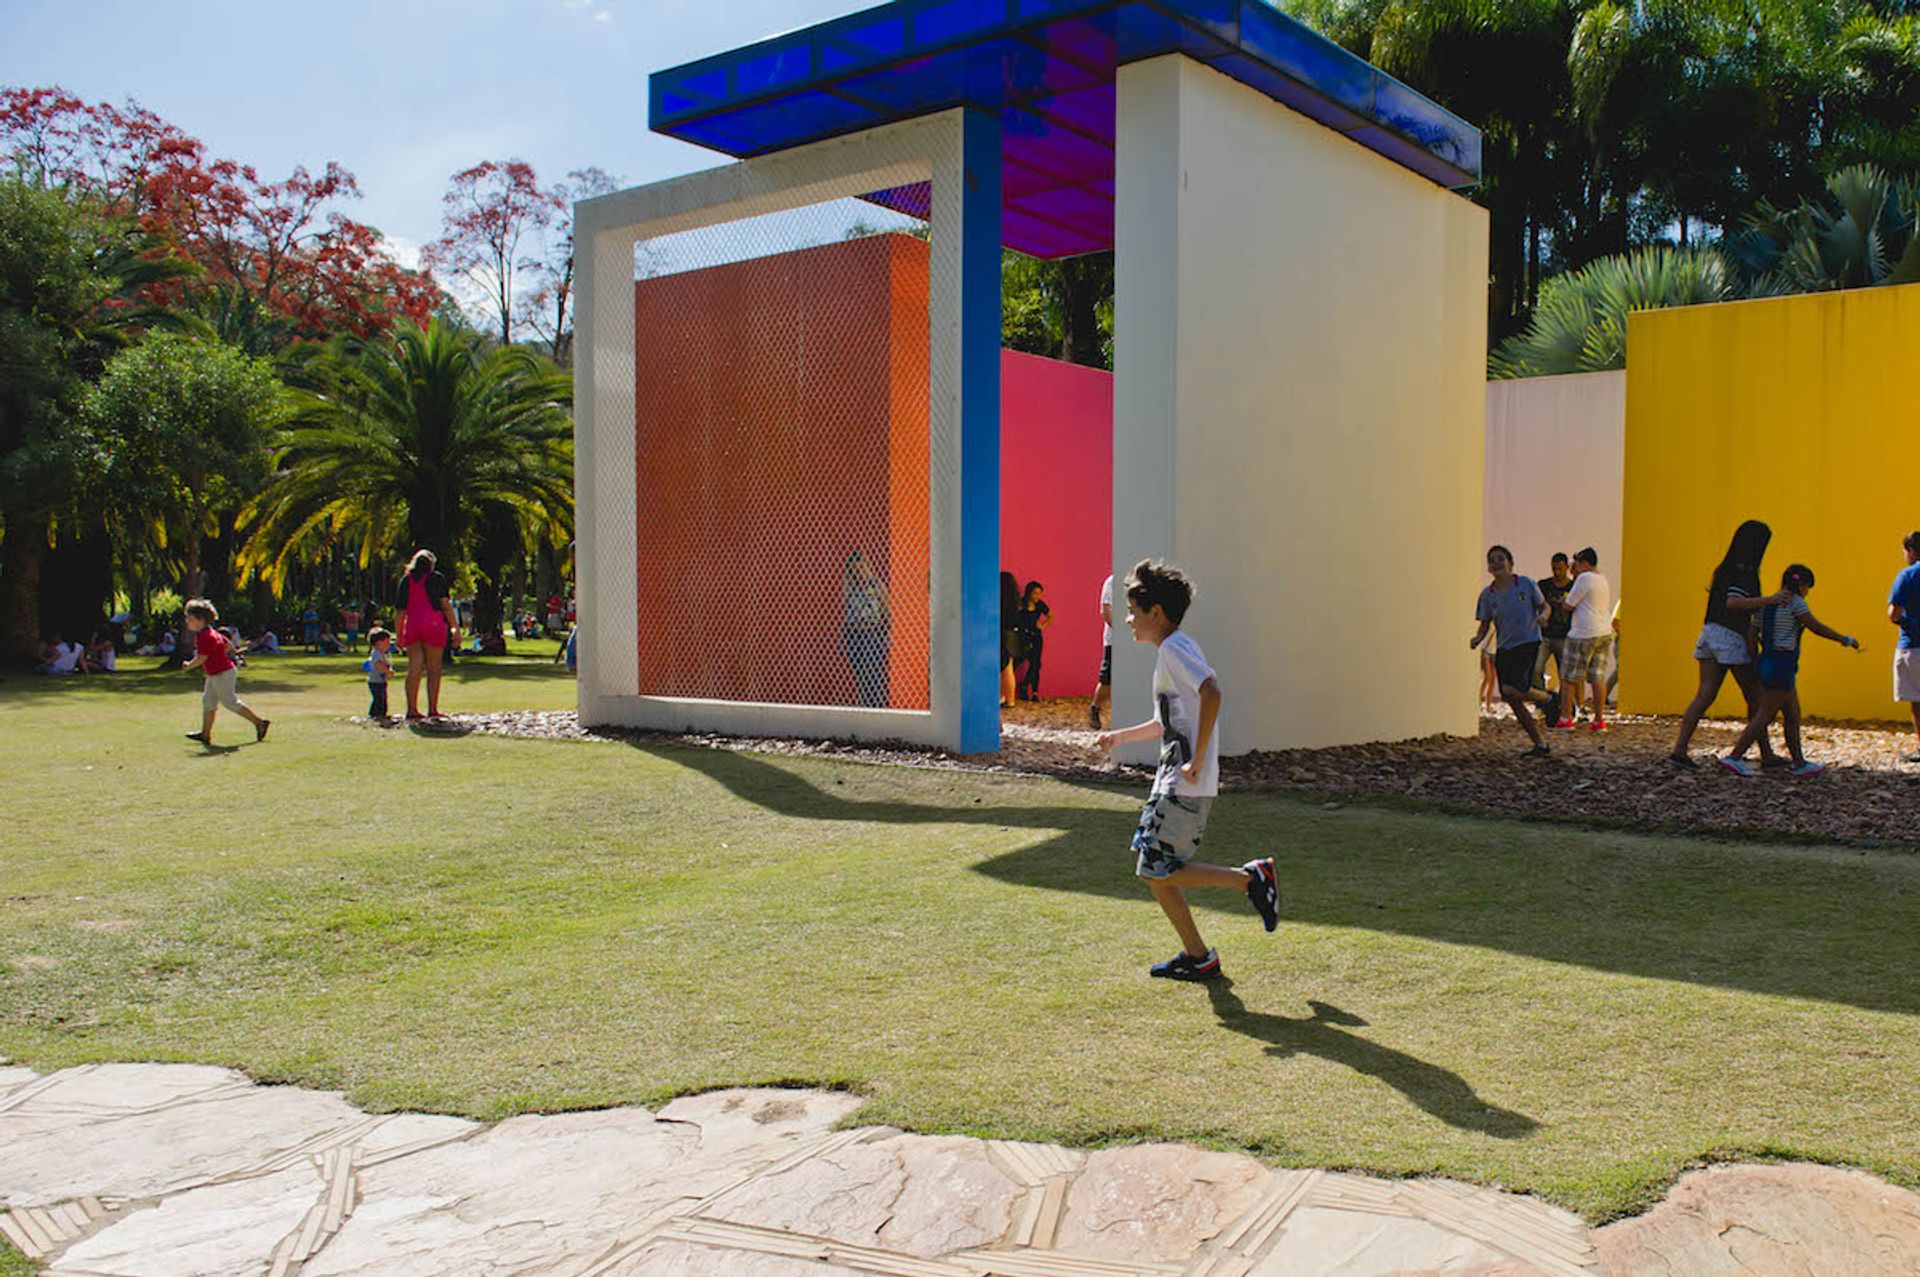 Visitors at Inhotim with an installation by the Brazilian sculptor Hélio Oiticica William Gomes